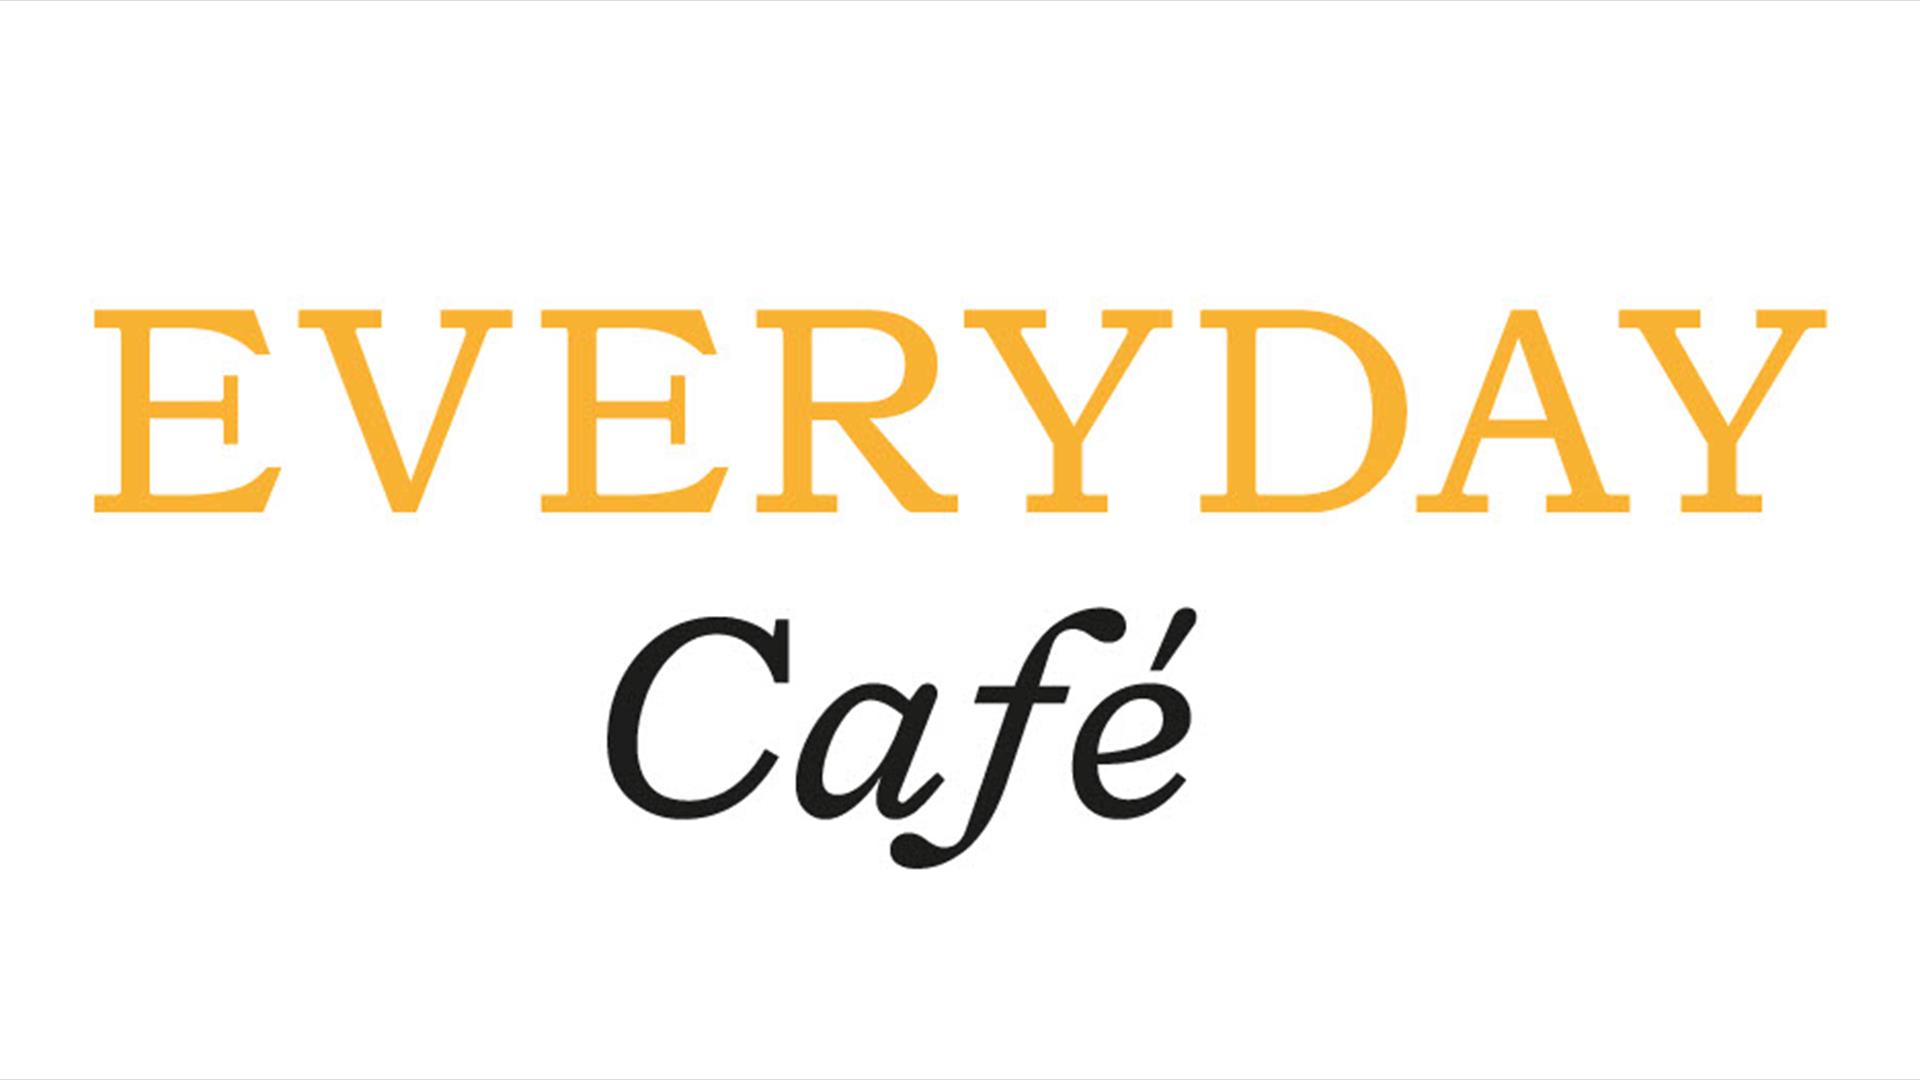 Image shows logo of Everyday Cafe 
in large letters with Everyday typed in yellow & Cafe typed in black